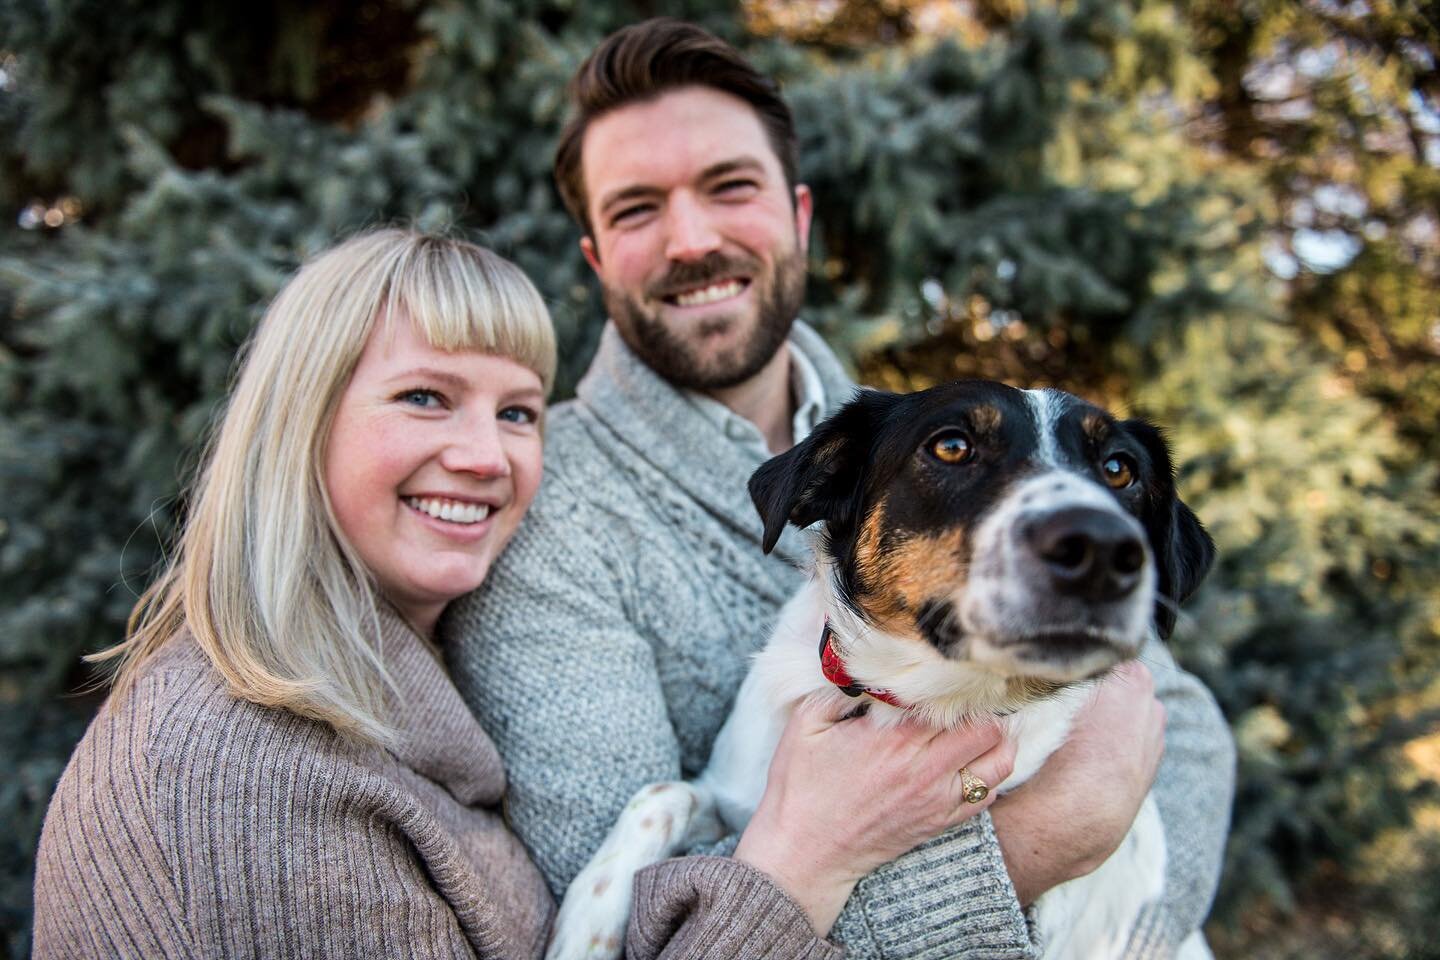 As a reminder, I&rsquo;m still offering discounts on all outdoor photo sessions&mdash;which means more dogs! Dogs love photoshoots. 

Use the code HALF-OFF or BRINGYOURDOG when you book to save 50% on your portrait sessions for individuals, couples, 